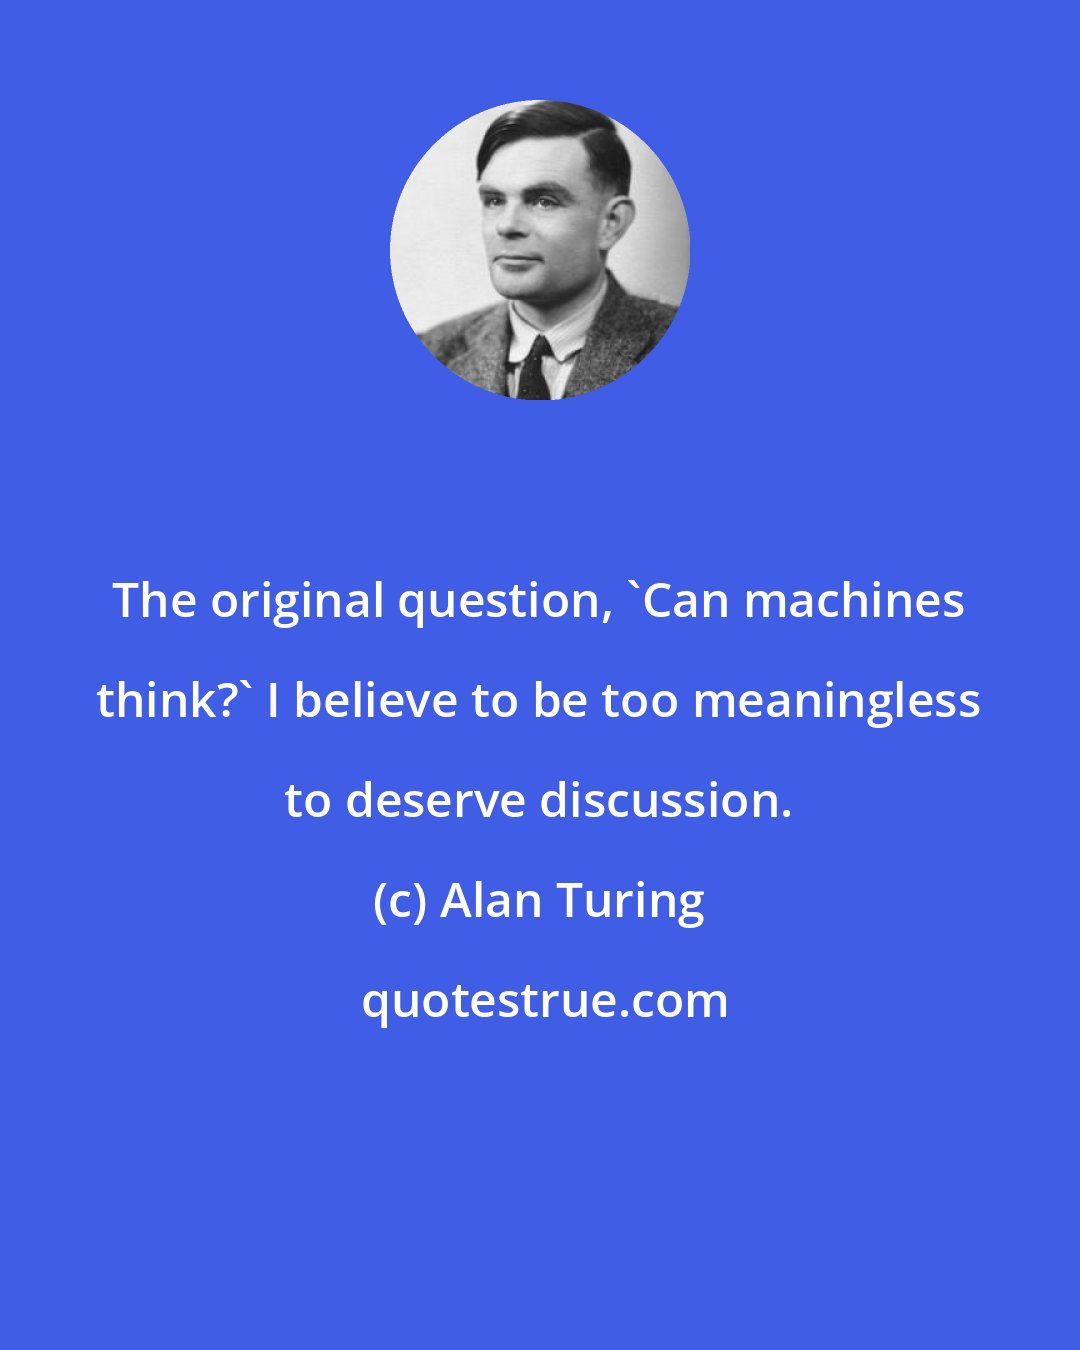 Alan Turing: The original question, 'Can machines think?' I believe to be too meaningless to deserve discussion.